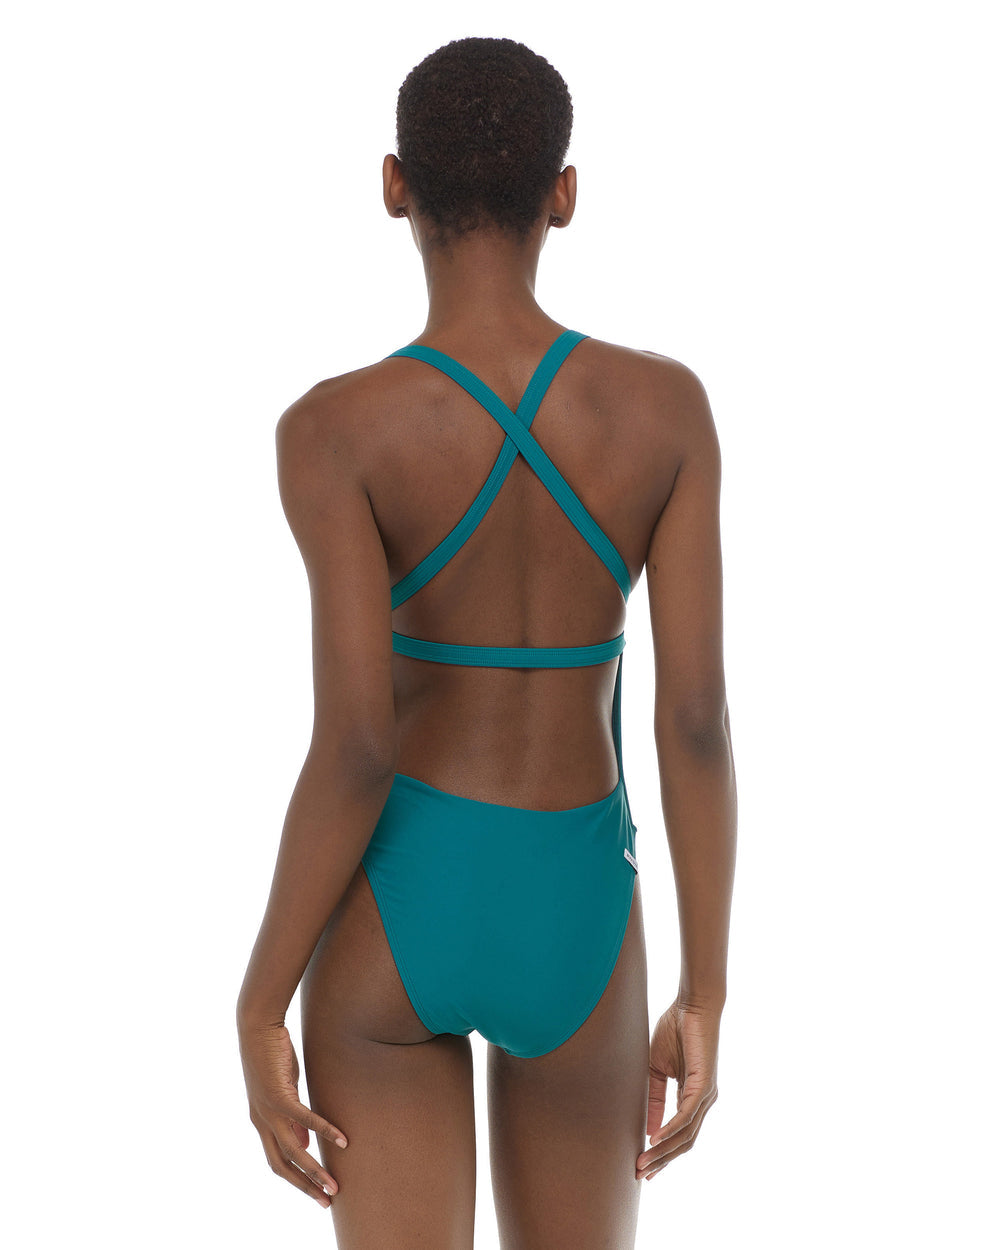 Body Glove Smoothies Electra One Piece Swimsuit - Kingfisher Green